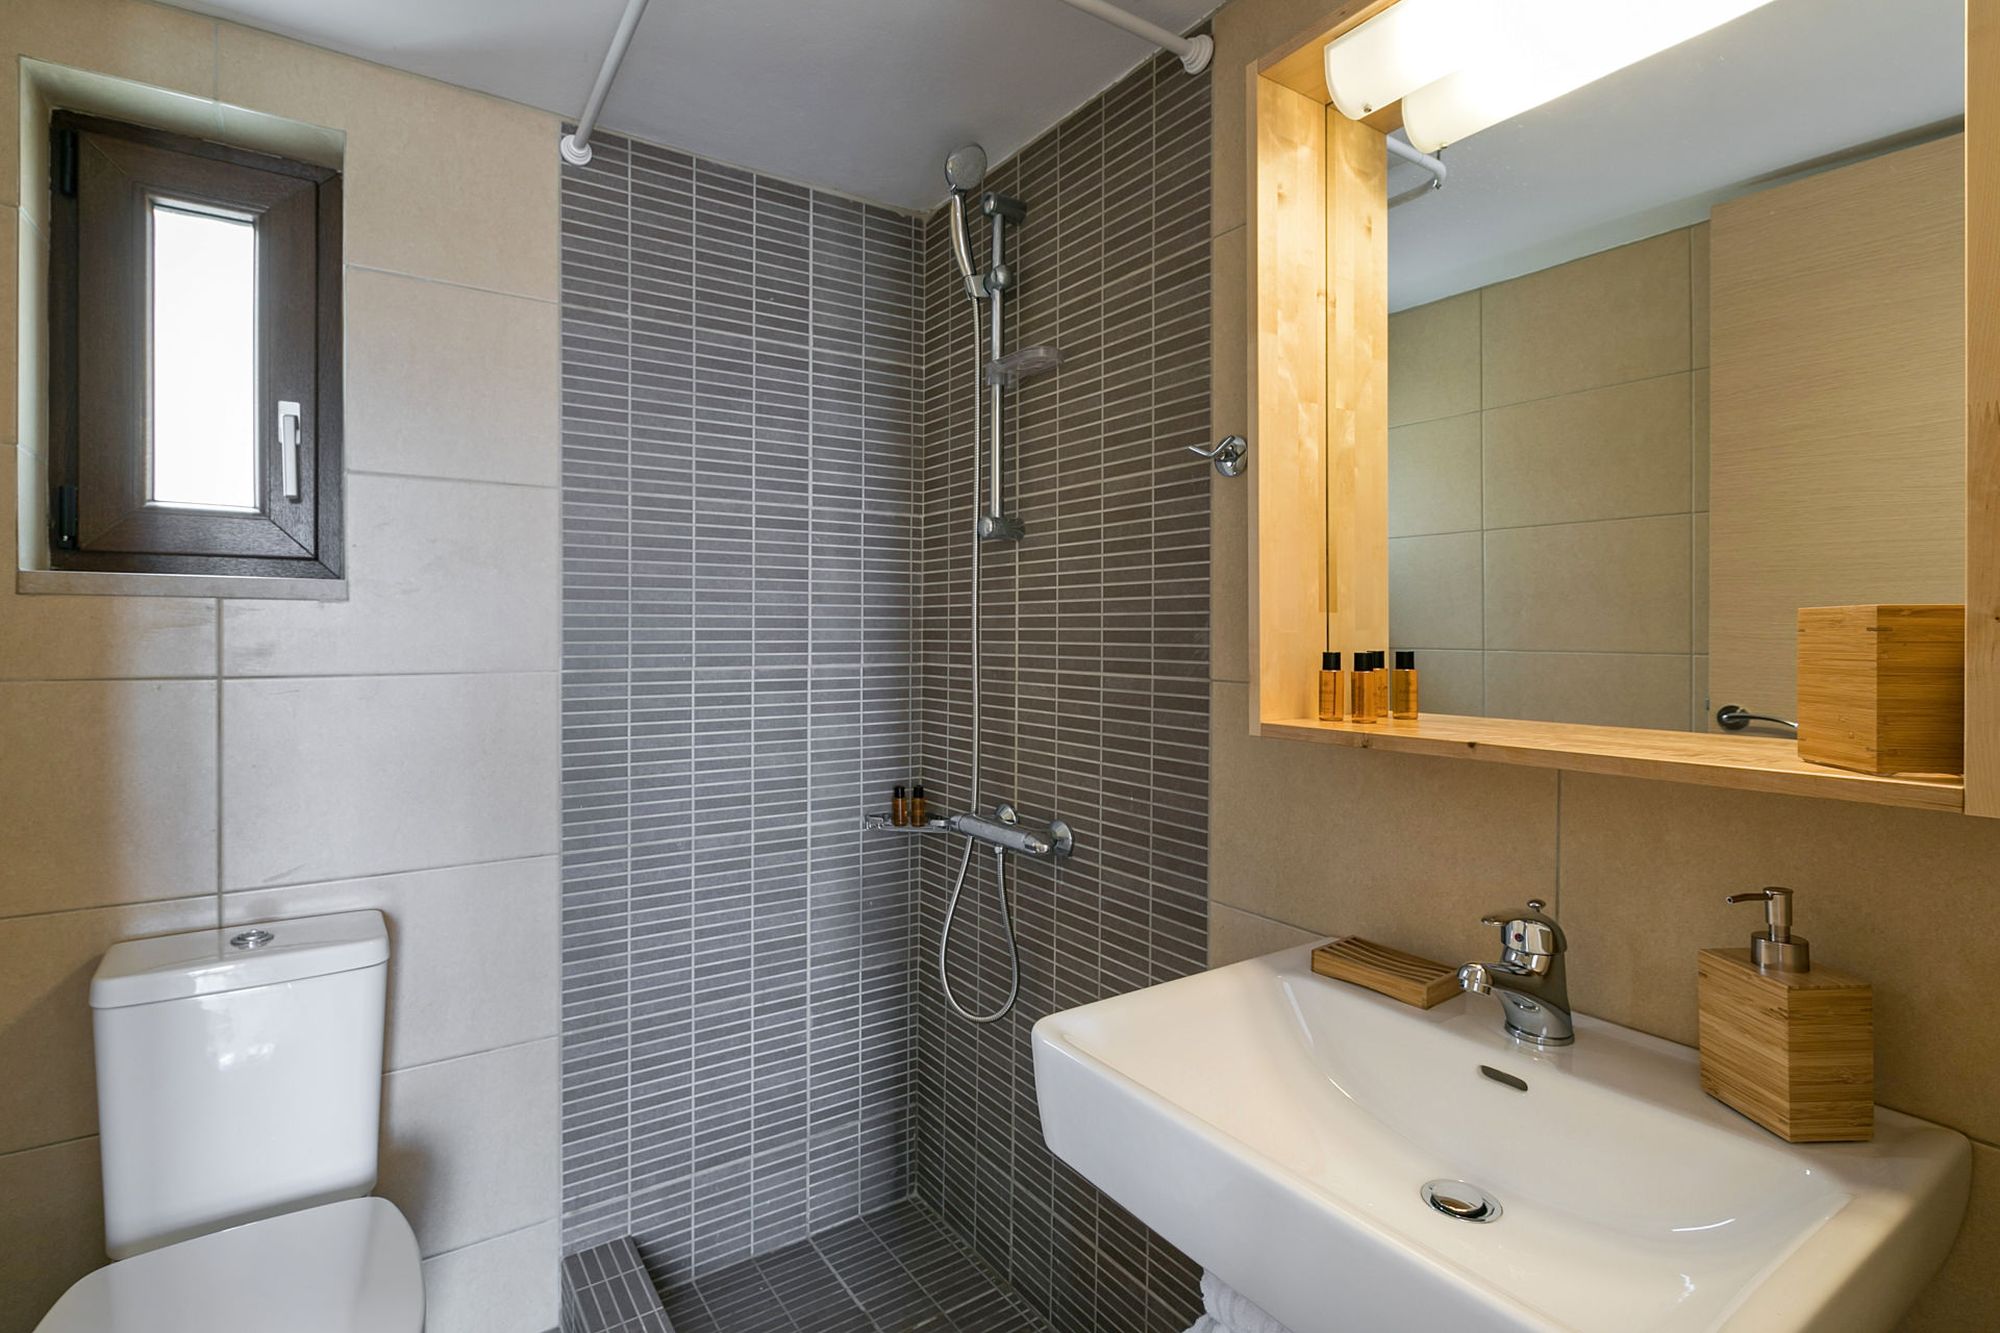 Modern bathroom with shower, big white washbasin, big wooden mirror and tiles in grey and beige tones.